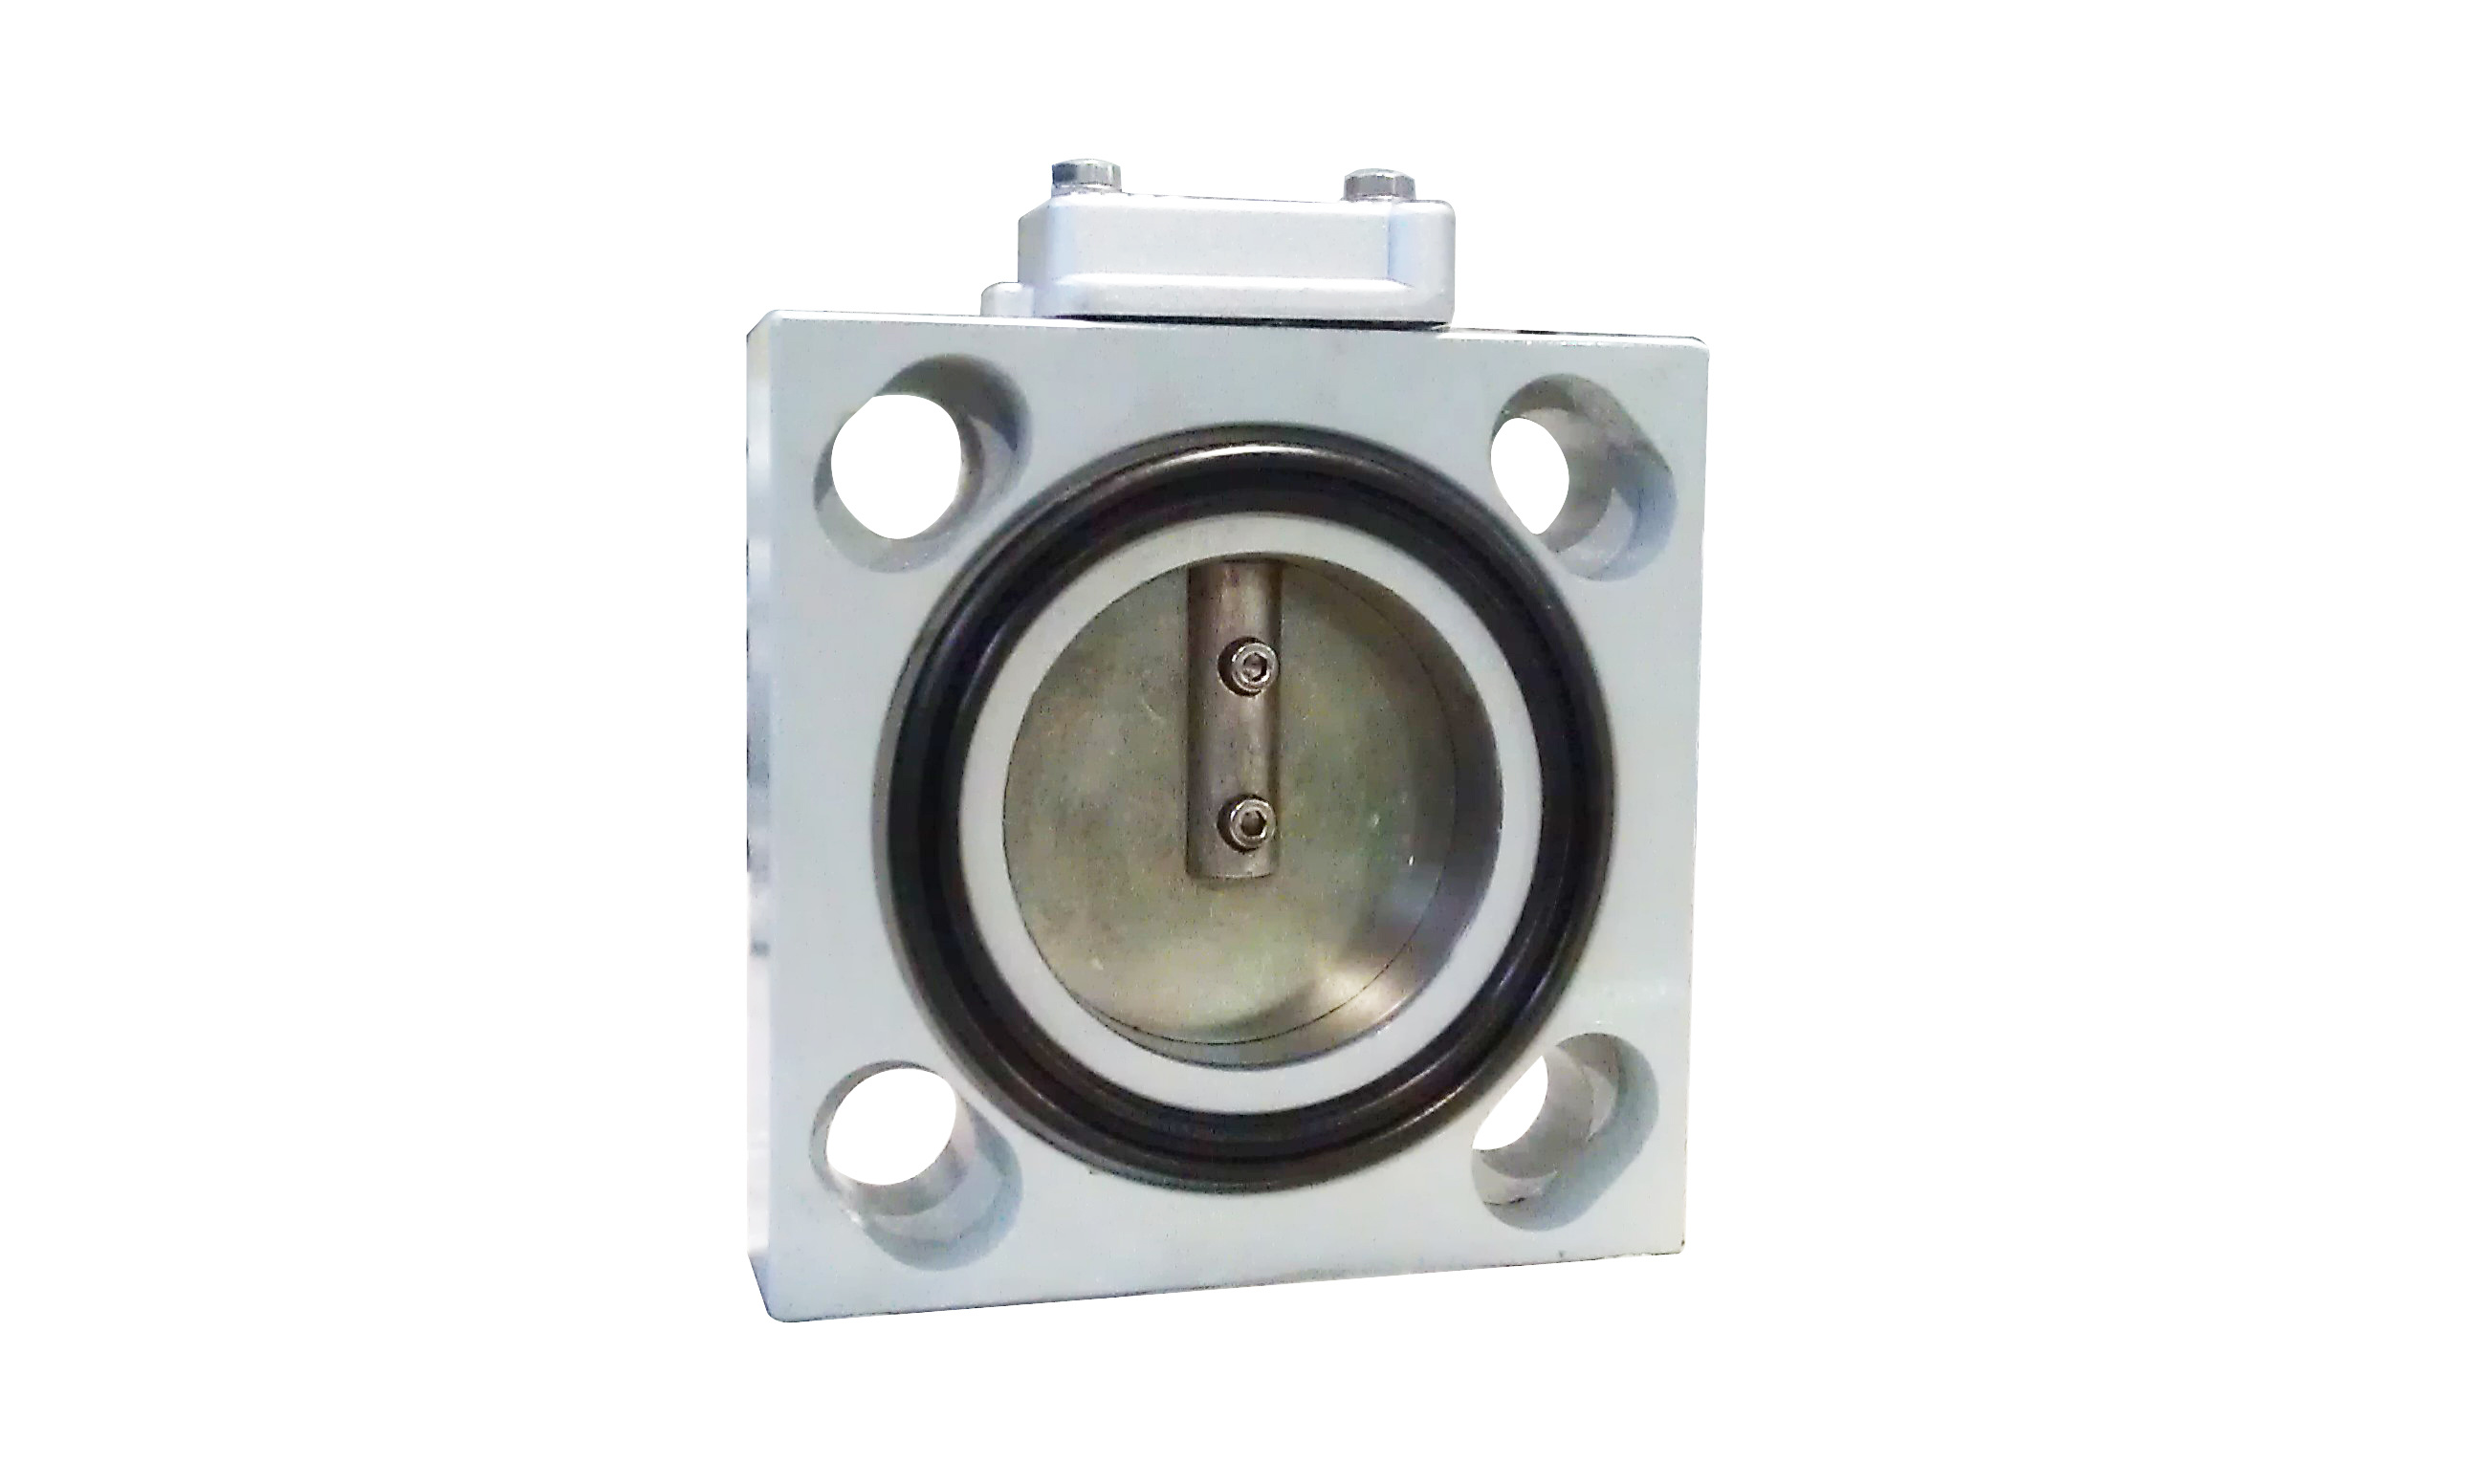 Dfbq-80-1 Hard Seal Butterfly Valve Steel Plate Square Butterfly Valve Transformer